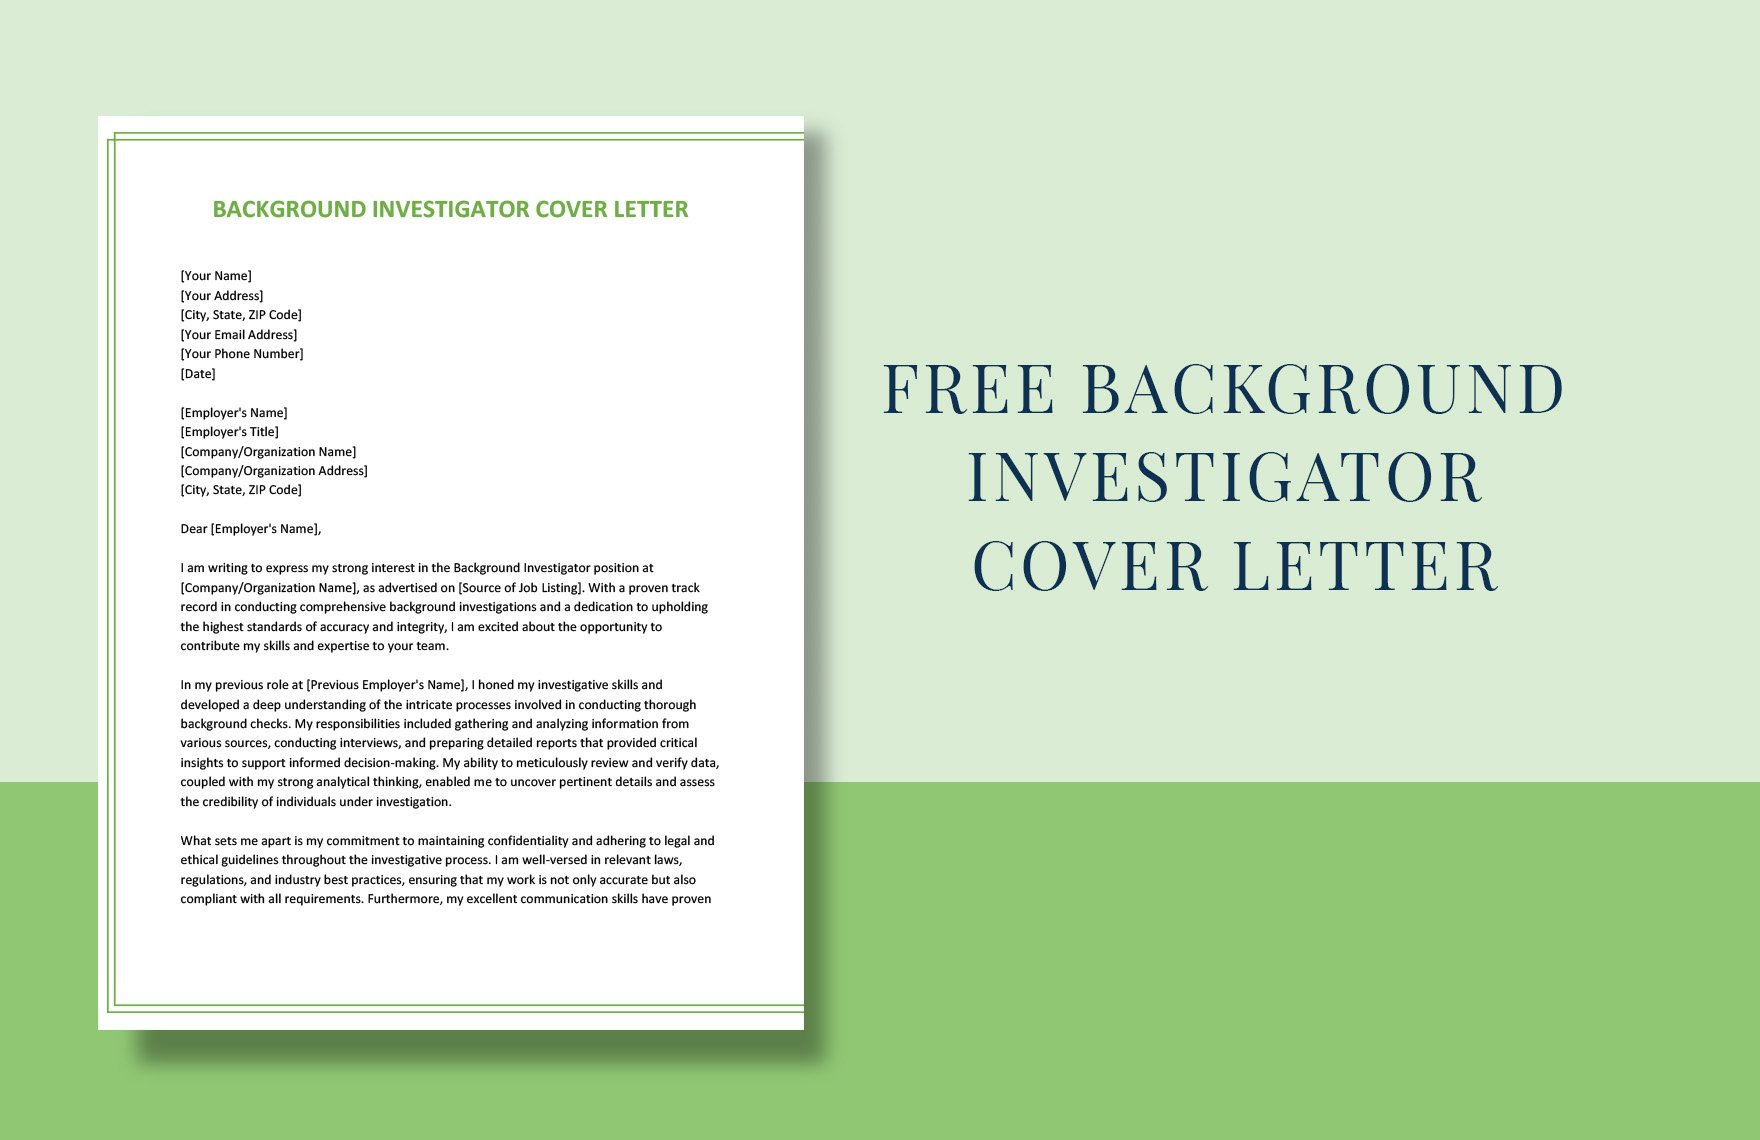 Free Background Investigator Cover Letter in Word, Google Docs